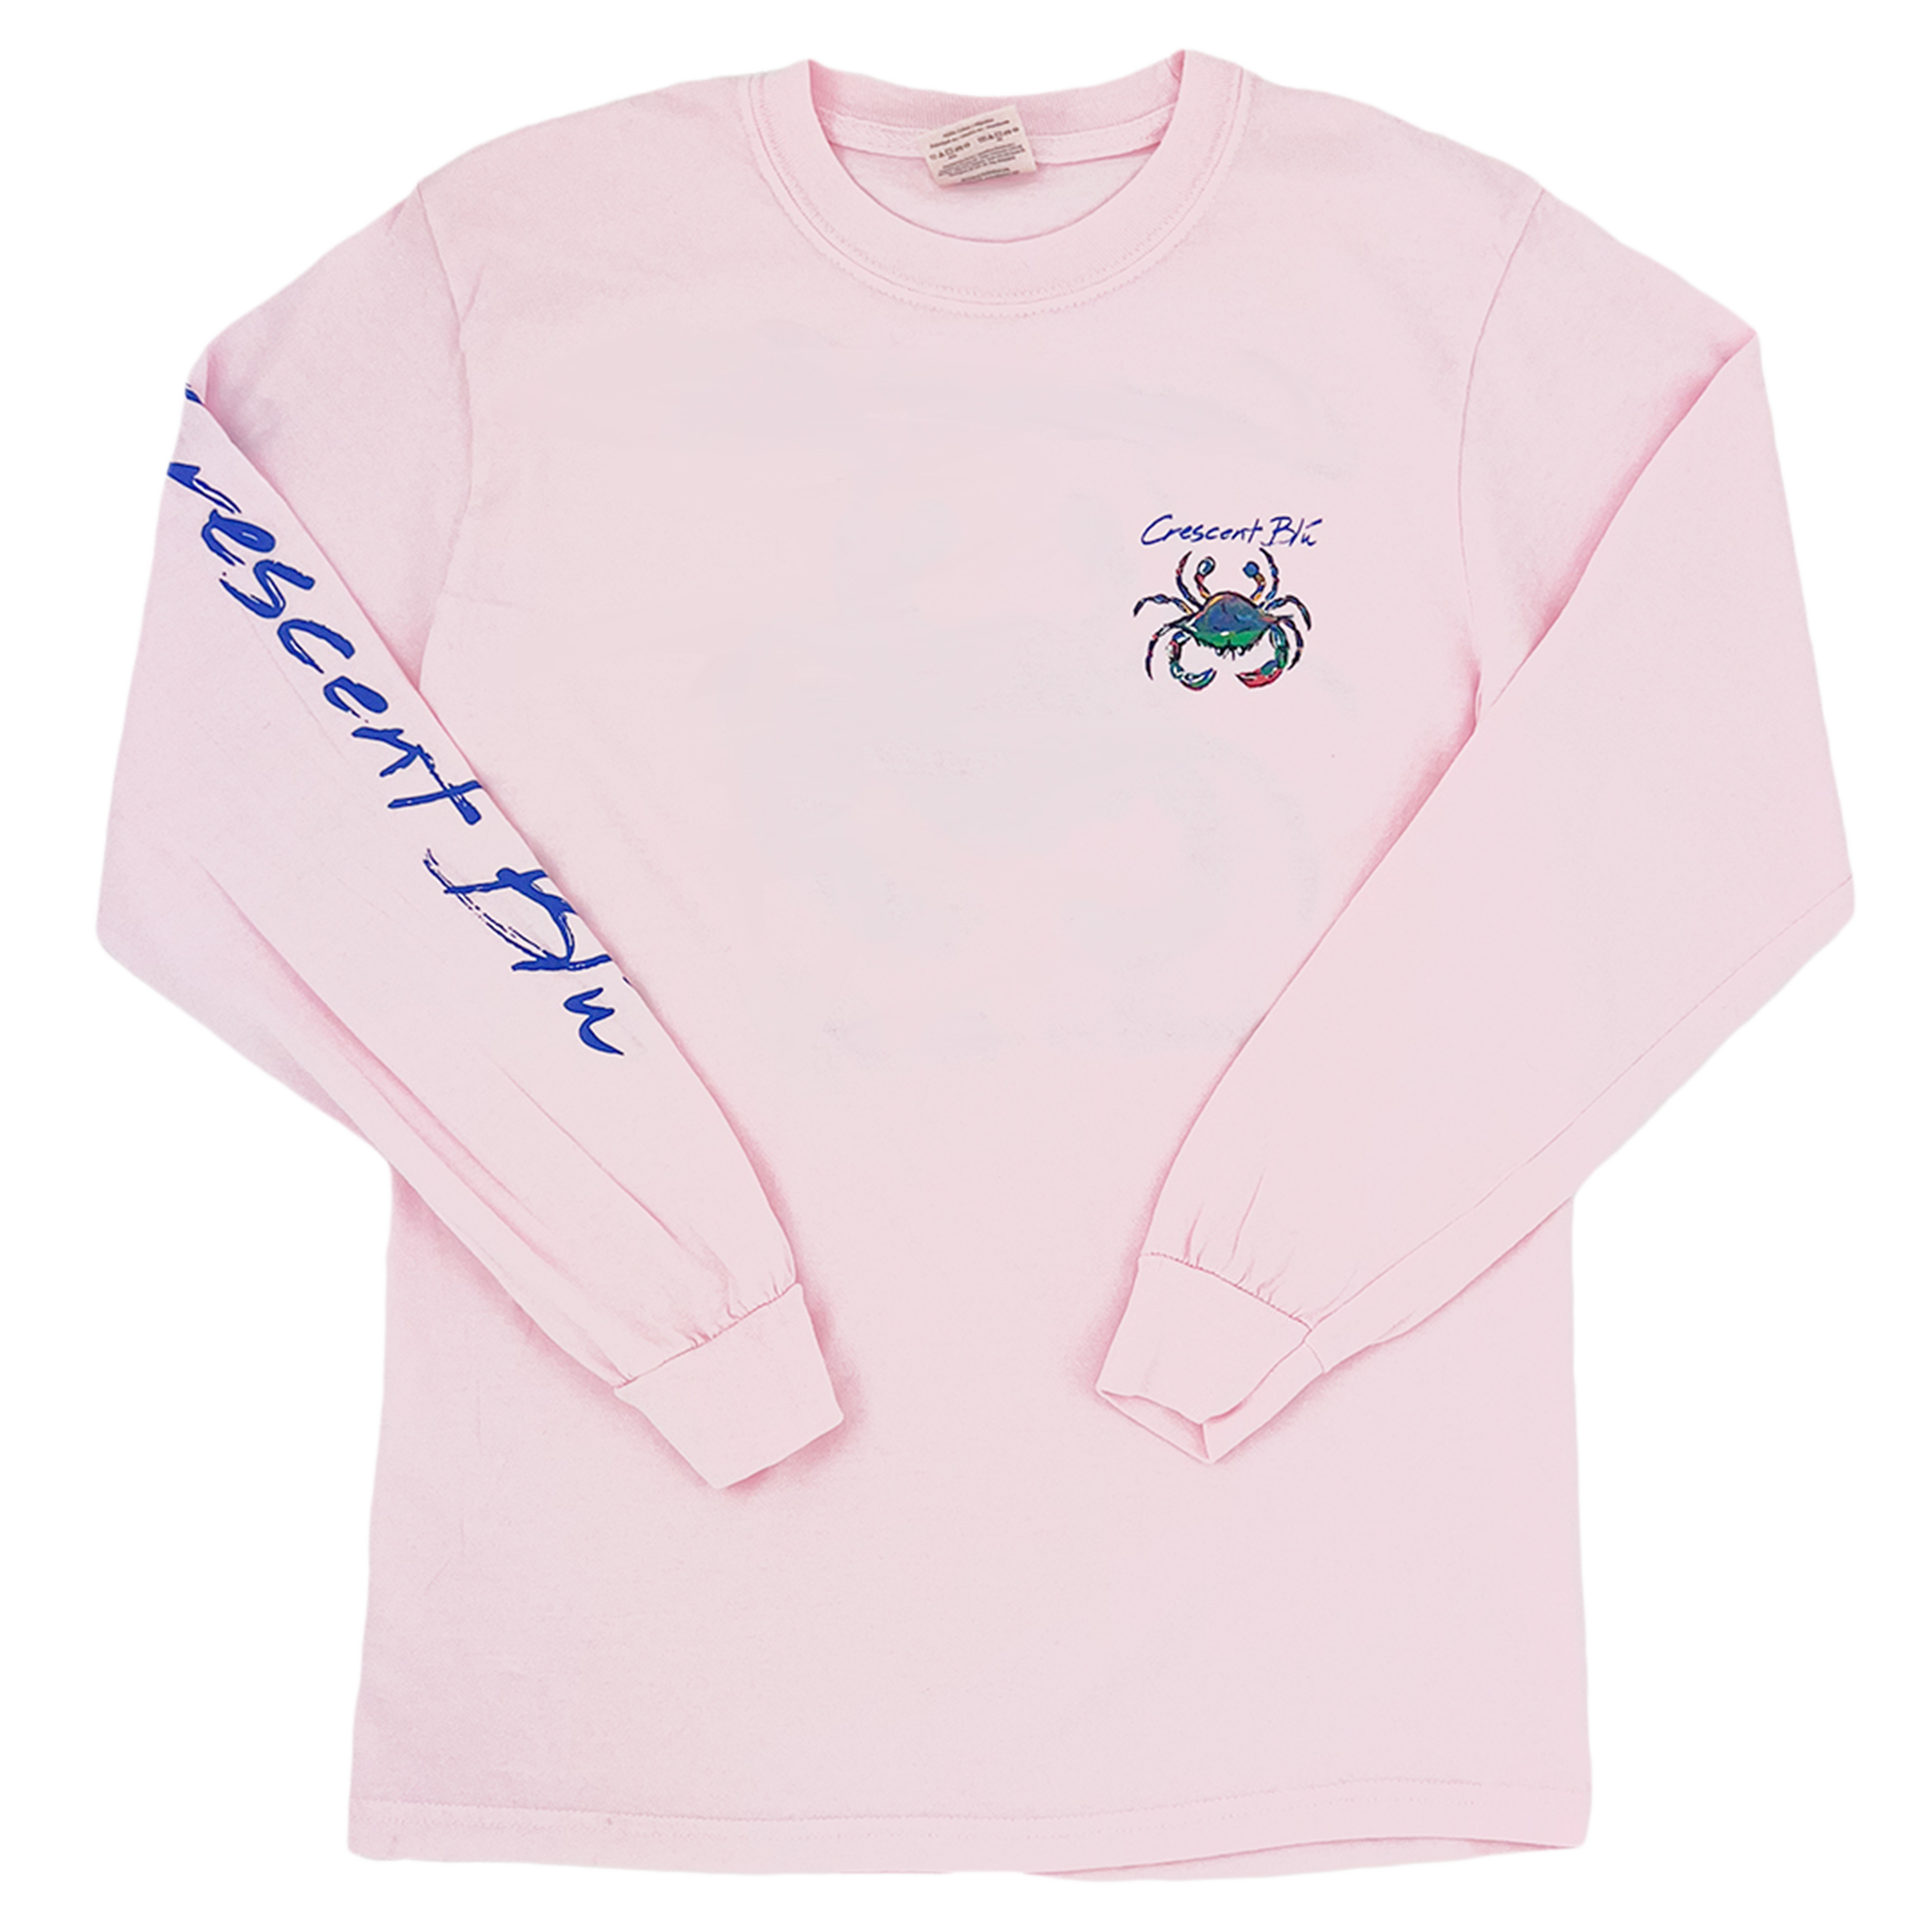 Front of Adult long sleeve Pink Blossom colored tee with Bask in the Blu printed along the right sleeve and small multi-colored logo on the left upper chest.